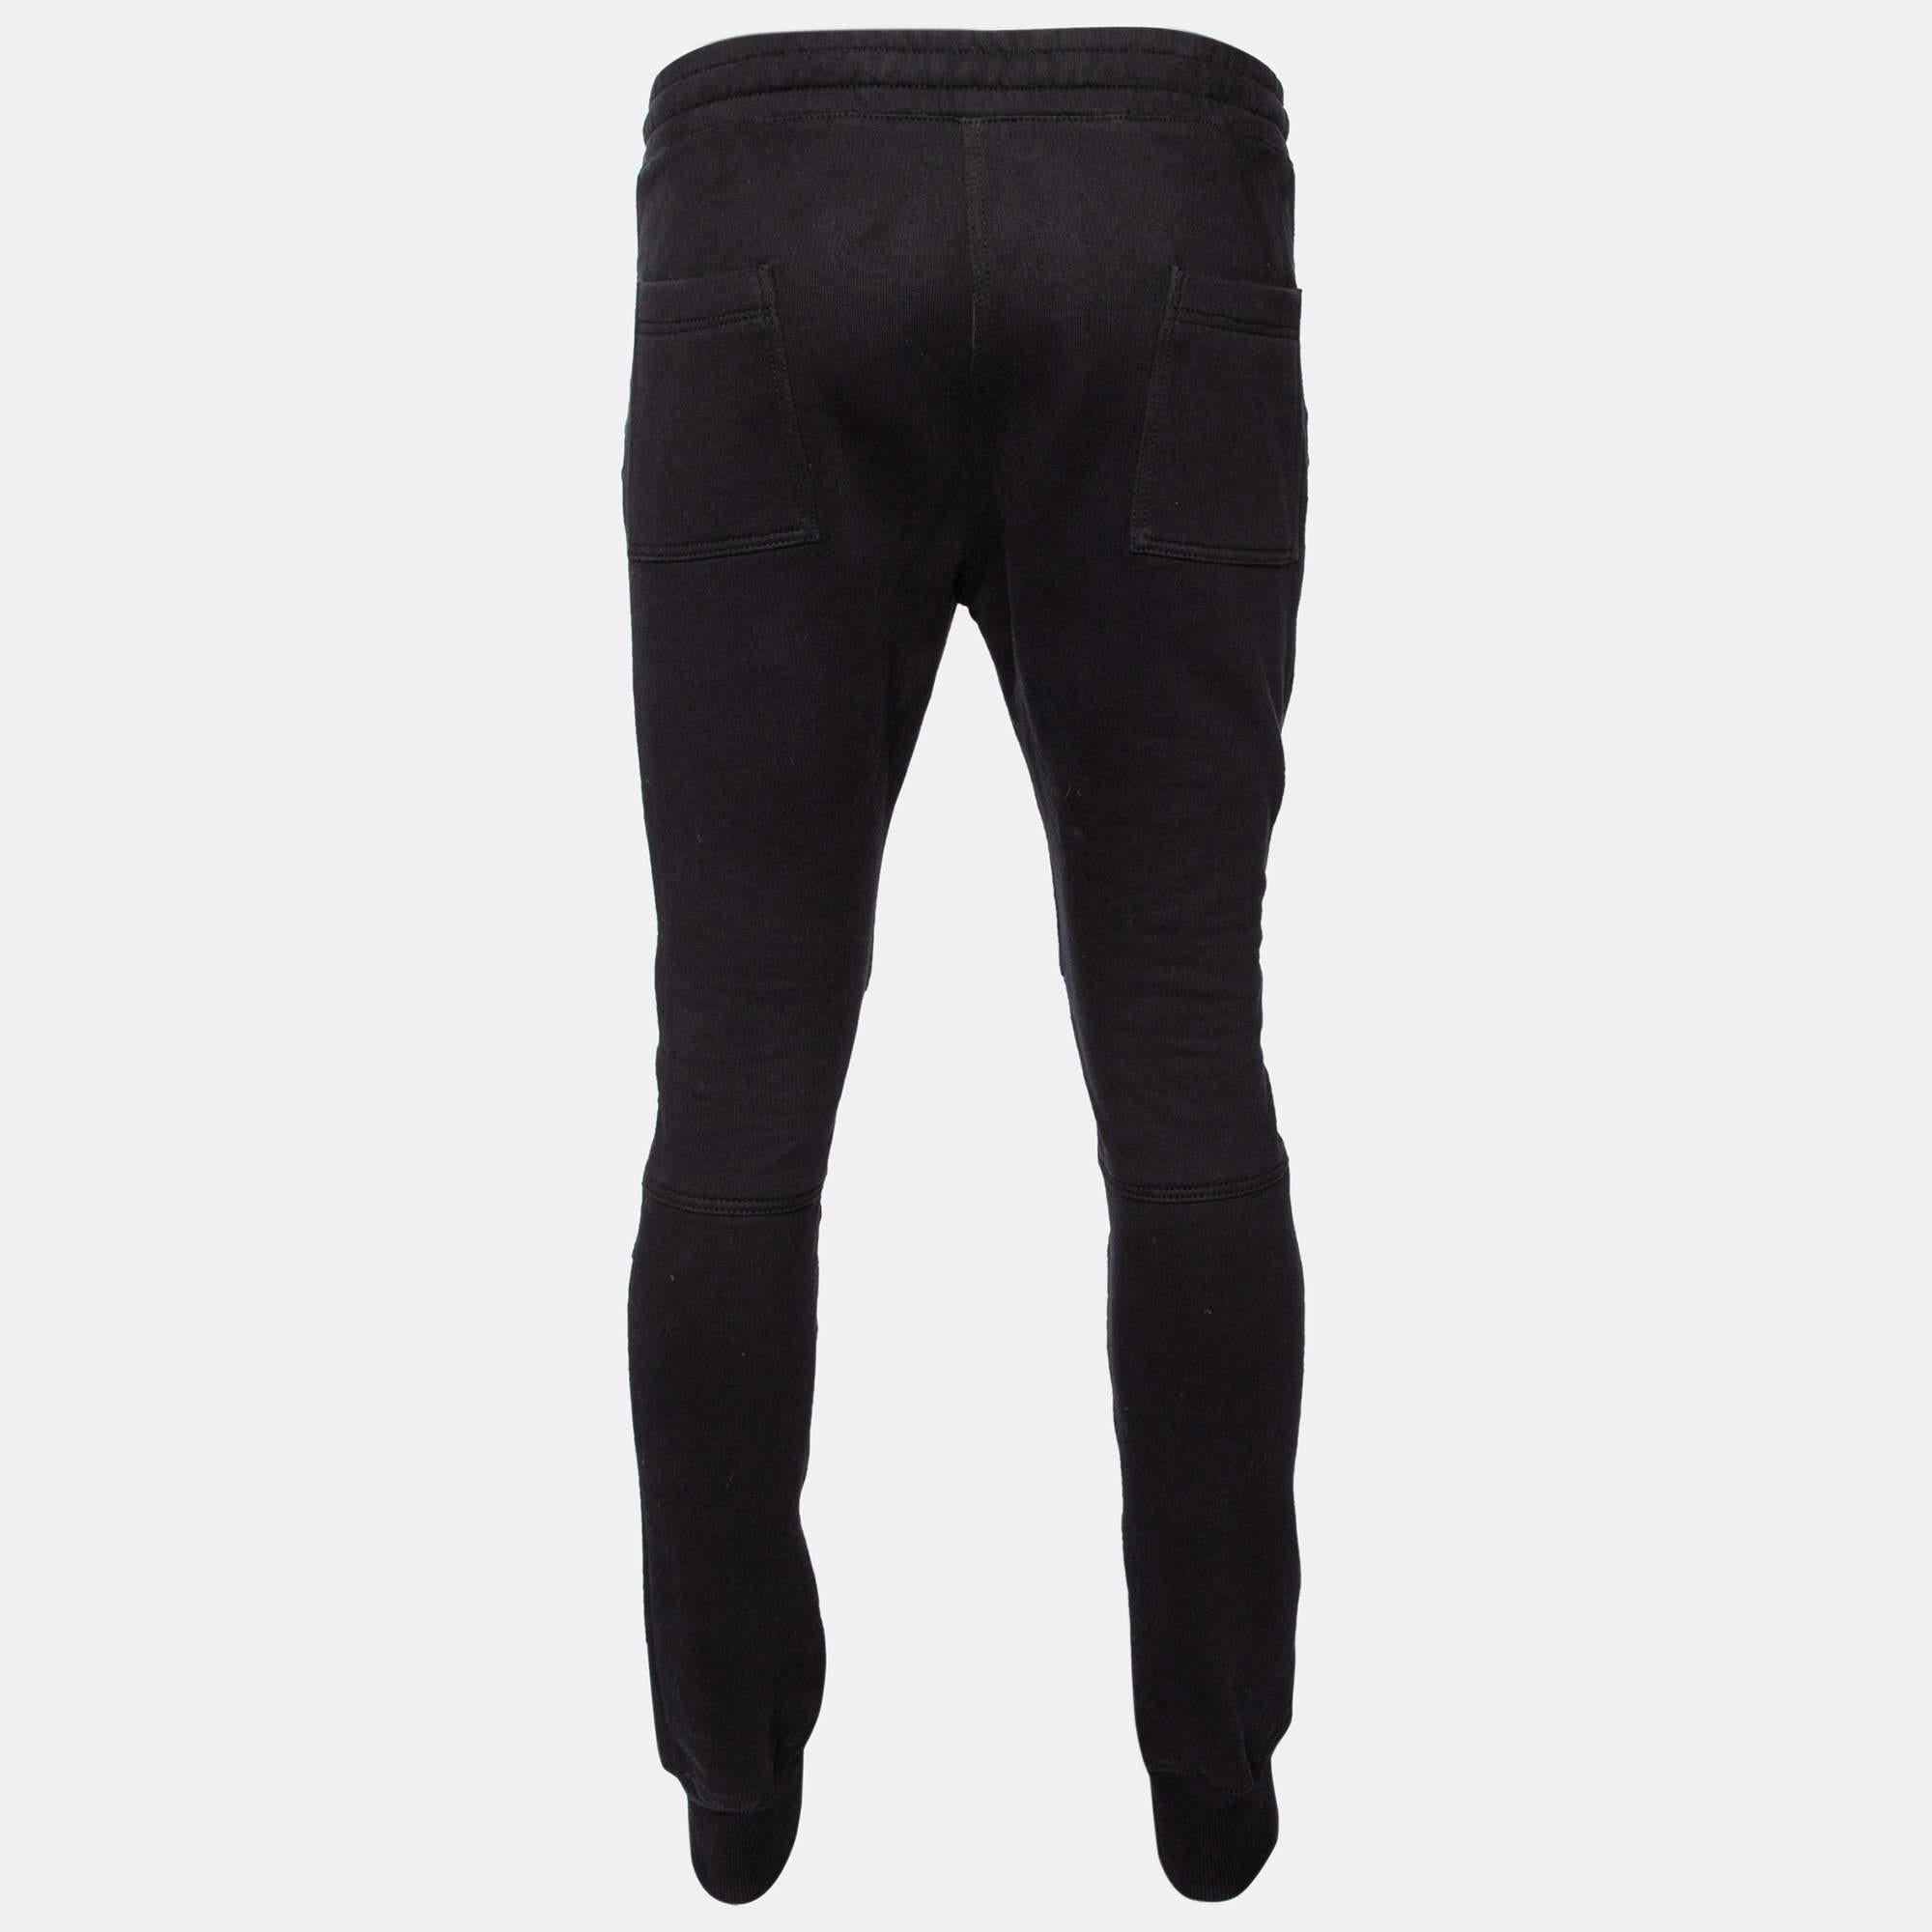 Balmain brings you these suave track pants that you can wear from day to night. Sewn meticulously from black cotton, the pants showcase rib paneling at the knees and have a fitted shape. They strike the right balance of comfort and high fashion.

